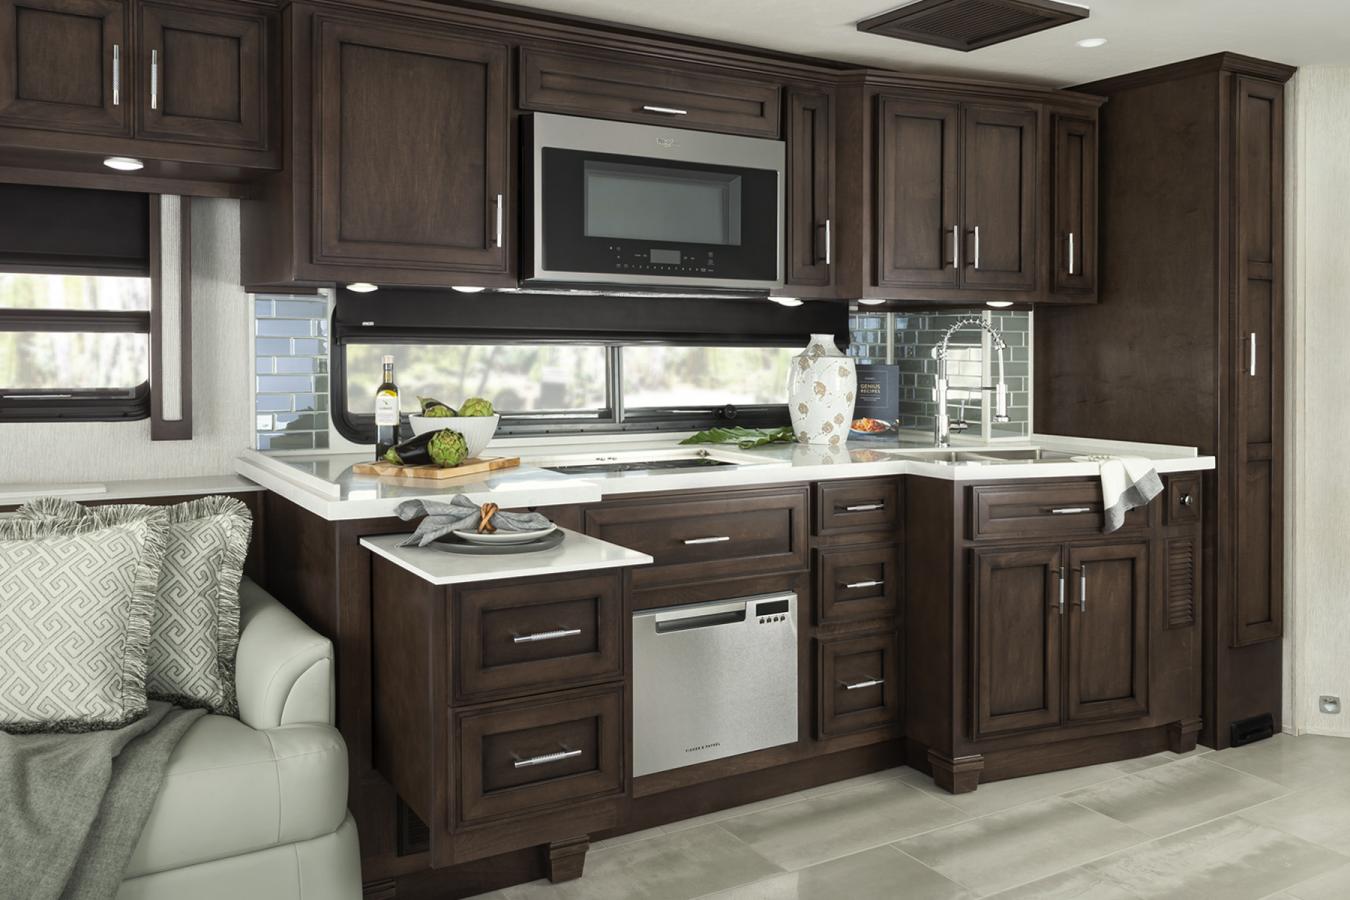 Interior kitchen cabinets of a Newmar RV